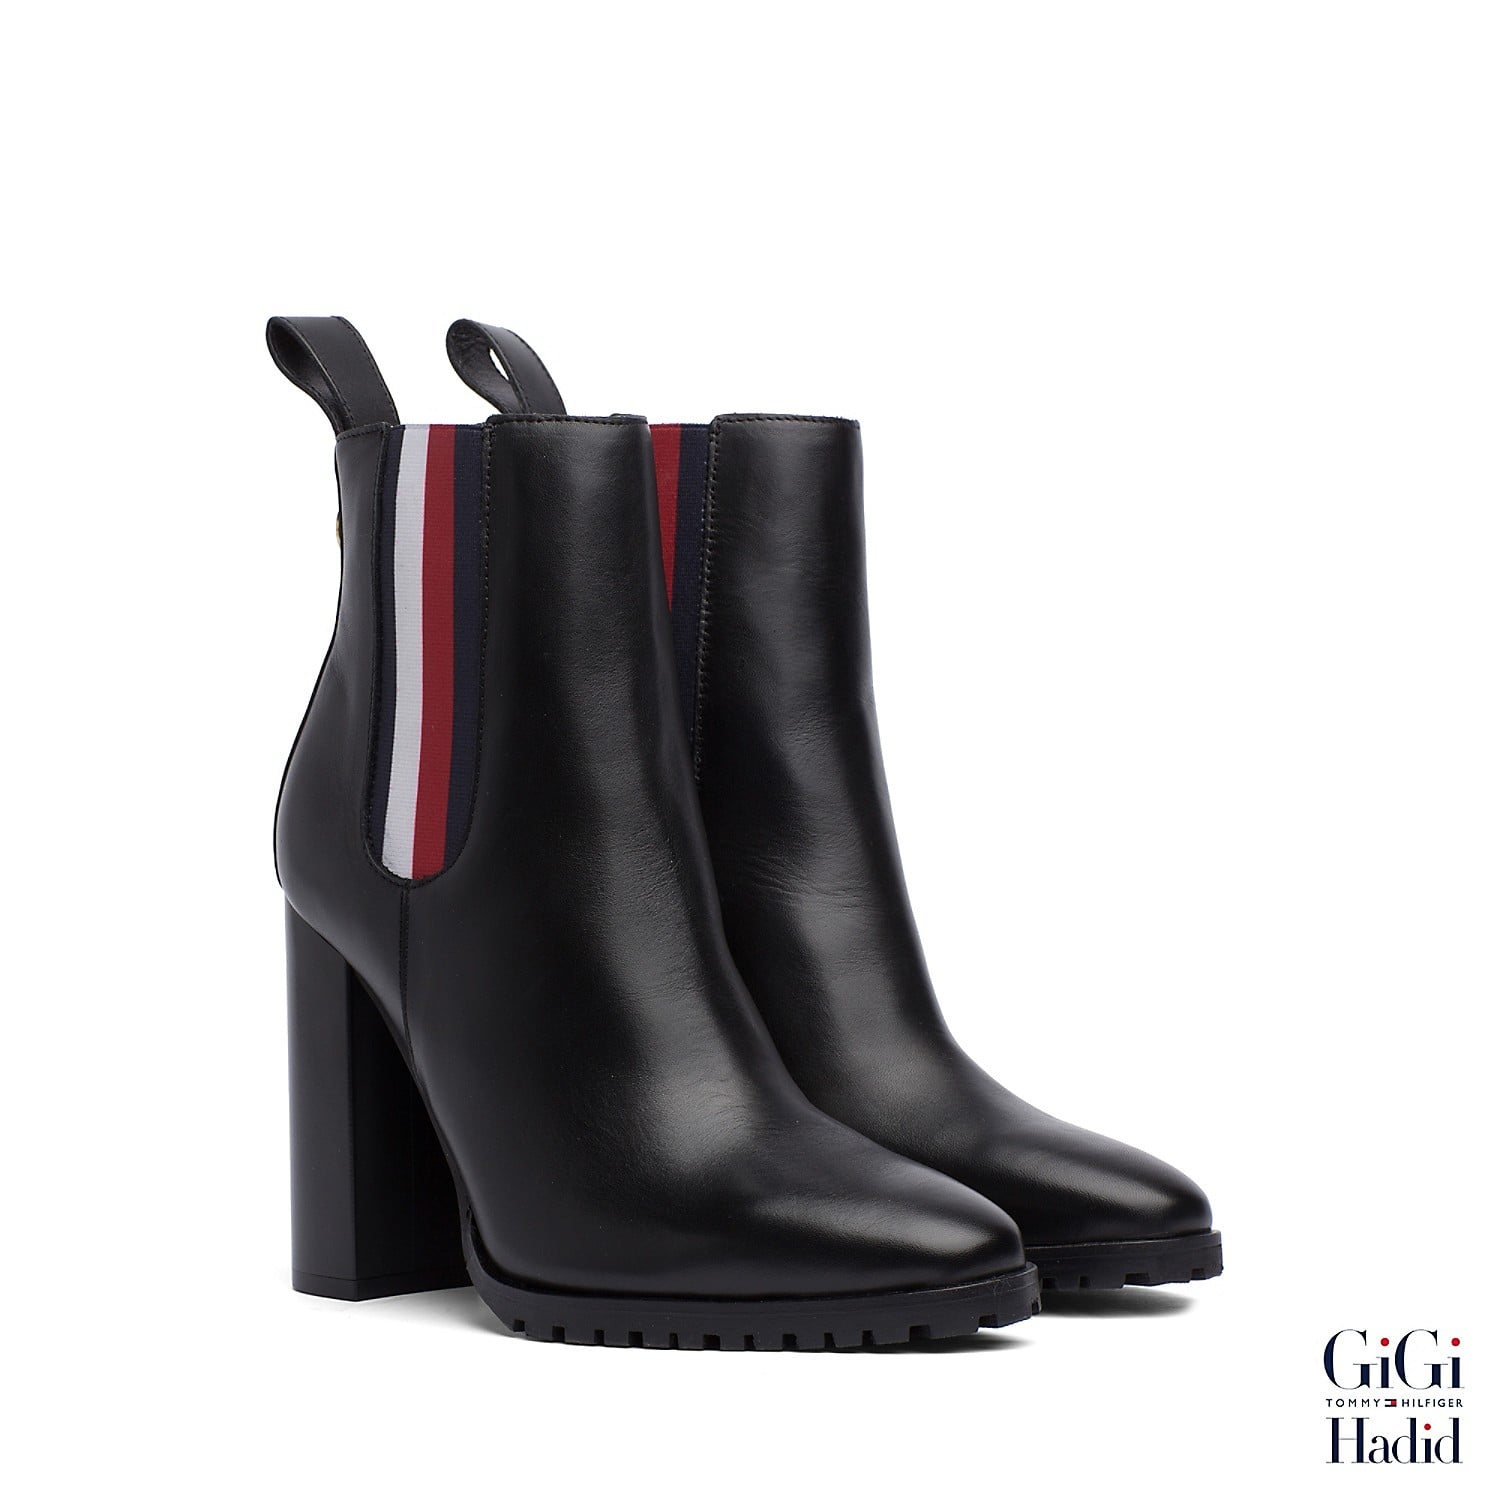 Gigi Hadid Heeled Ankle Boot ($190) Shop Every Single Piece From Hadid x Tommy Hilfiger's Final Collection | POPSUGAR Fashion Photo 20